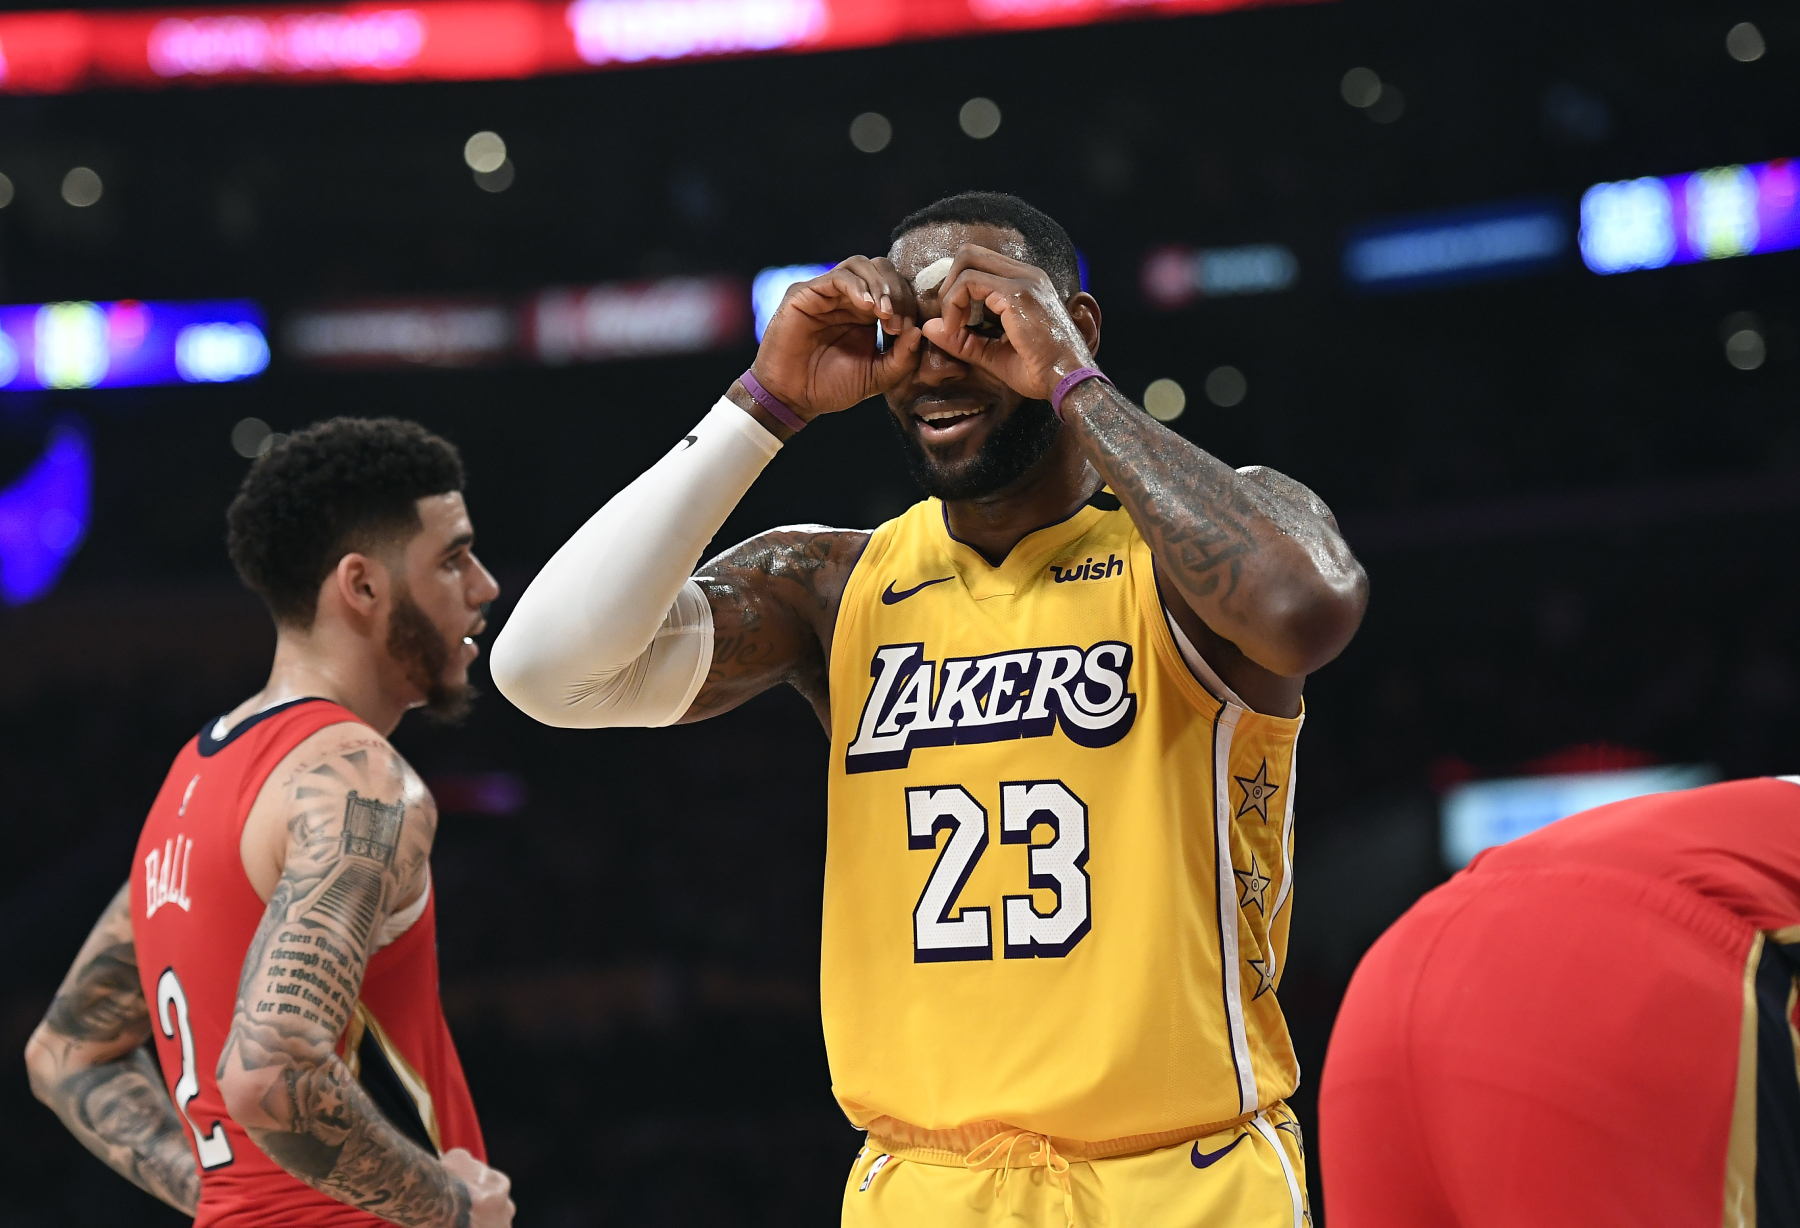 LeBron James has as many haters as he does fans. The Lakers star just recently called out his critics for being wrong about him.